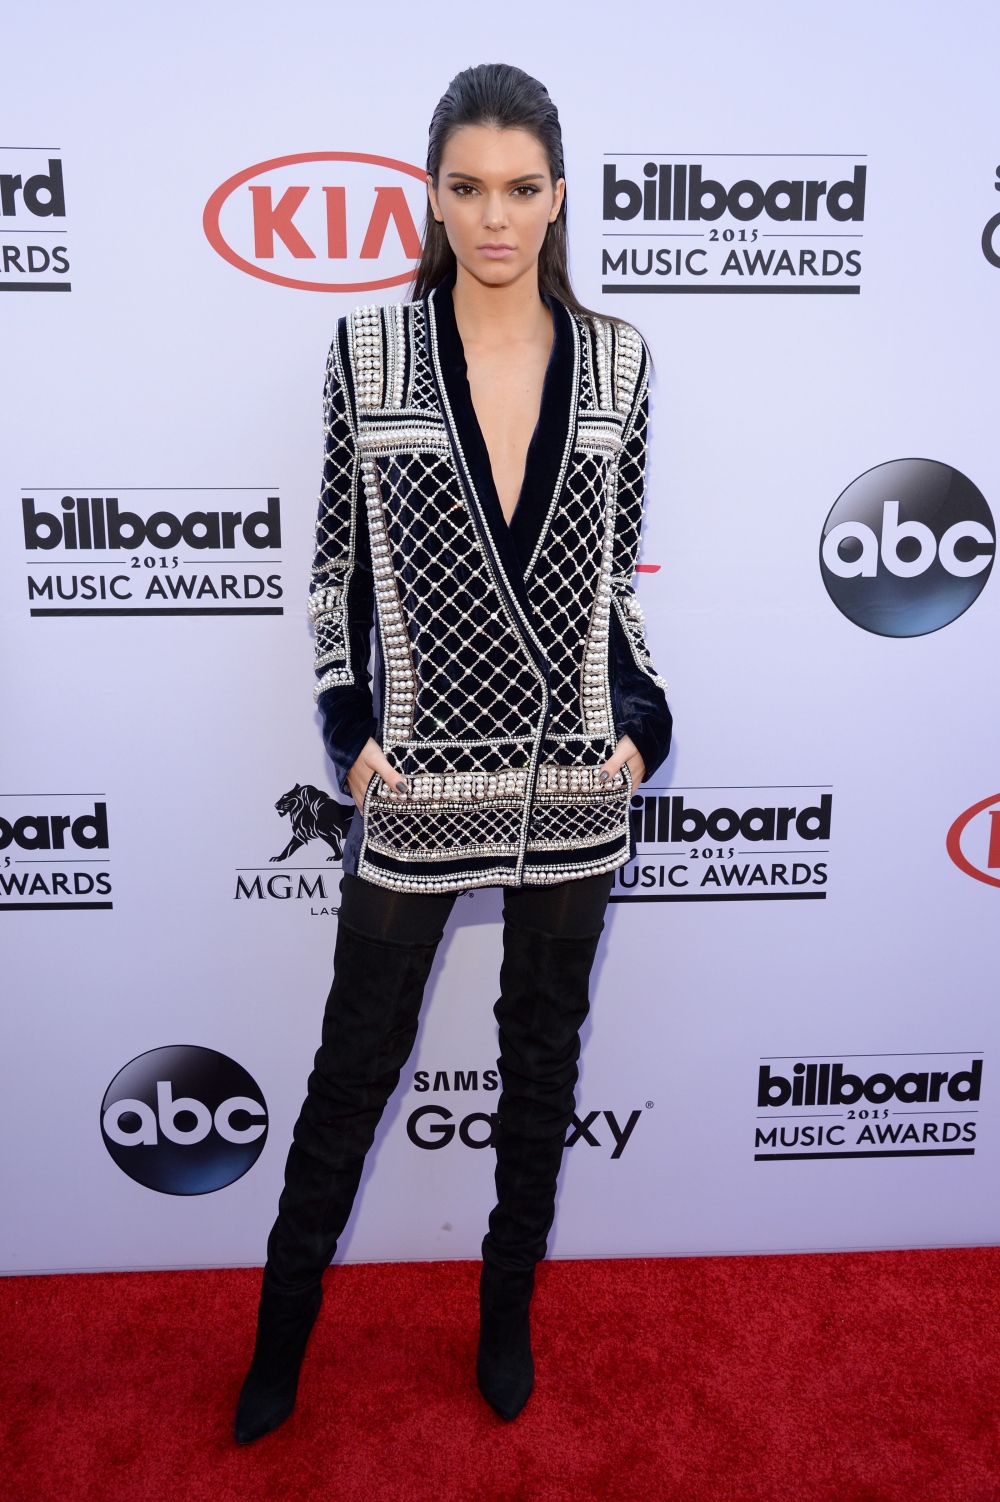 LAS VEGAS, NV - MAY 17: TV personality Kendall Jenner, wearing Balmain x H&M, attends the 2015 Billboard Music Awards at MGM Grand Garden Arena on May 17, 2015 in Las Vegas, Nevada. (Photo by Kevin Mazur/BMA2015/WireImage)